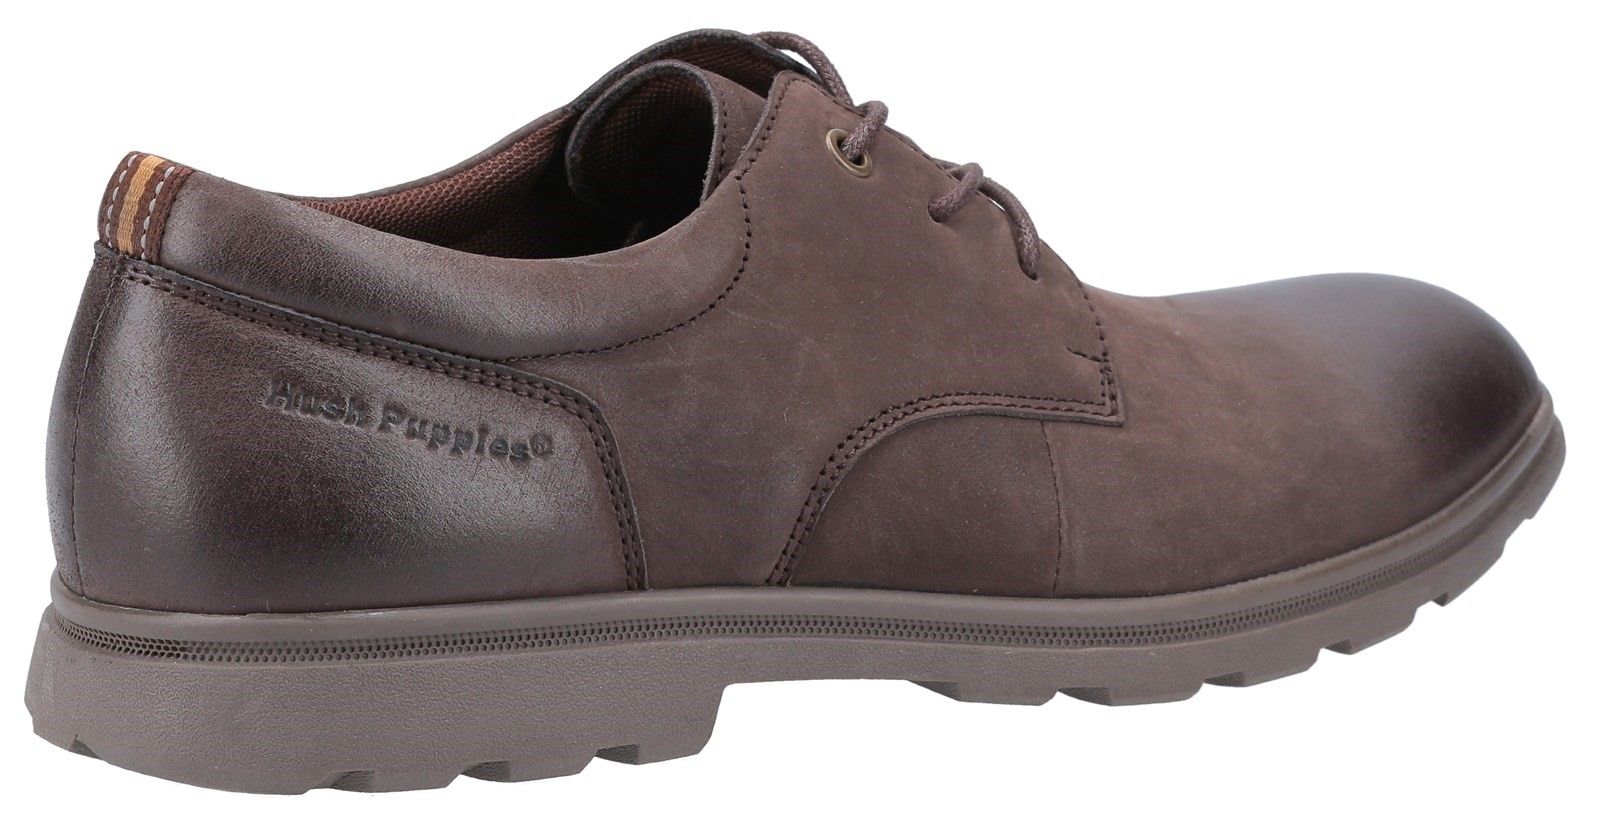 Men's classic derby lace up shoe Trevor; perfect for relaxed day-to-day styling with comfortable Nubuck leather uppers, padded collar, breathable textile lining and lightweight, flexible rubber sole for all day comfort.Nubuck leather upper. 
Lace up fastening. 
Padded collar for extra comfort. 
Breathable textile lining. 
Memory foam comfort insole.